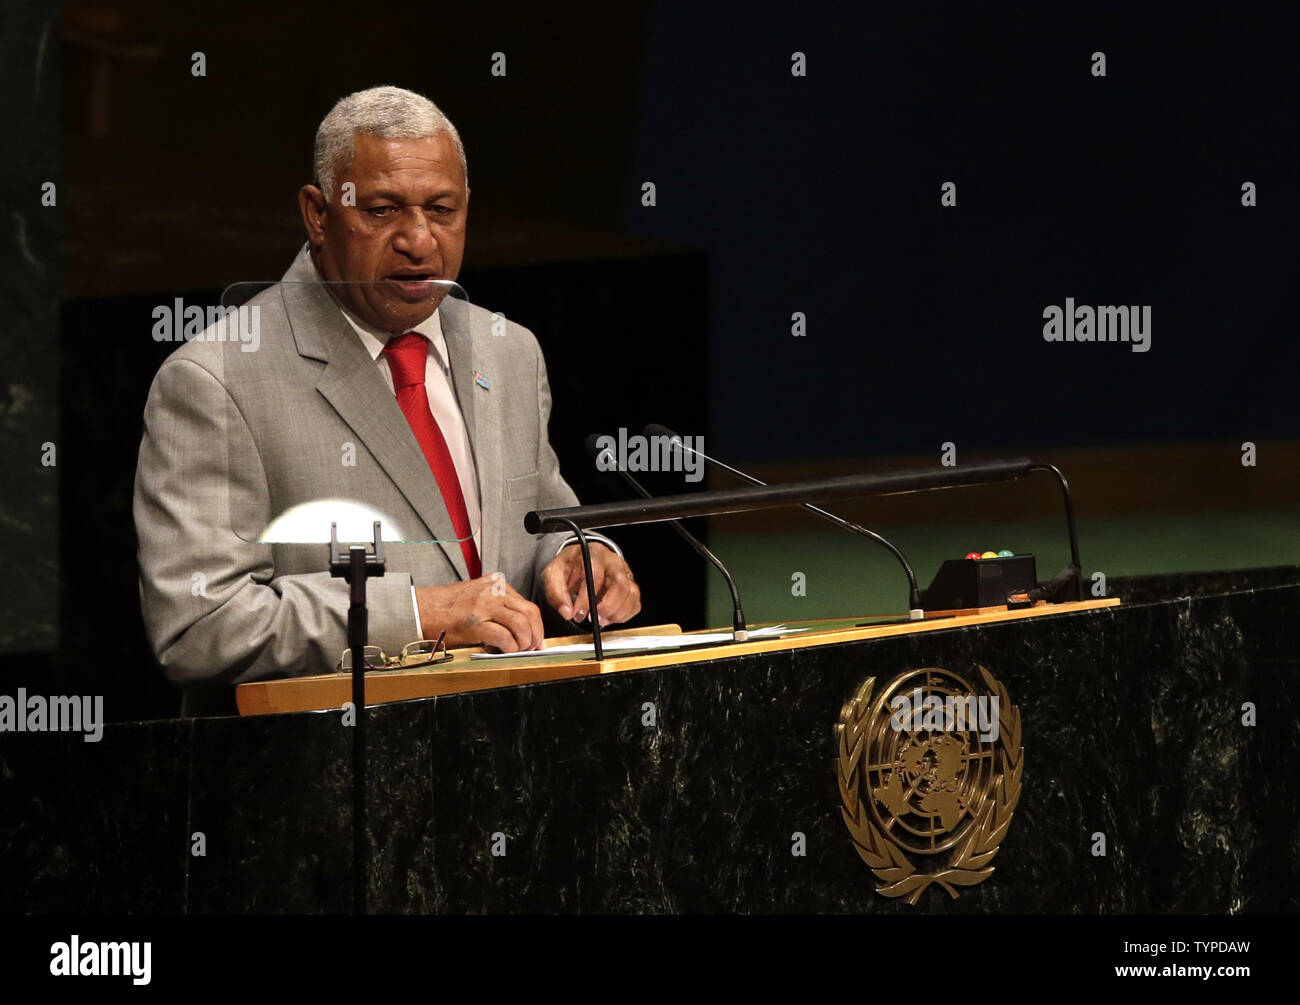 Prime Minister and Commander of the Military Forces of the Republic of Fiji Commodore Josaia Bainimarama speaks at the 69th United Nations General Assembly General Debate in the UN building in New York City on September 27, 2014. The General Assembly, comprised of all 193 Members of the United Nations, provides a unique forum for multilateral discussion of the full spectrum of international issues.     UPI/John Angelillo Stock Photo